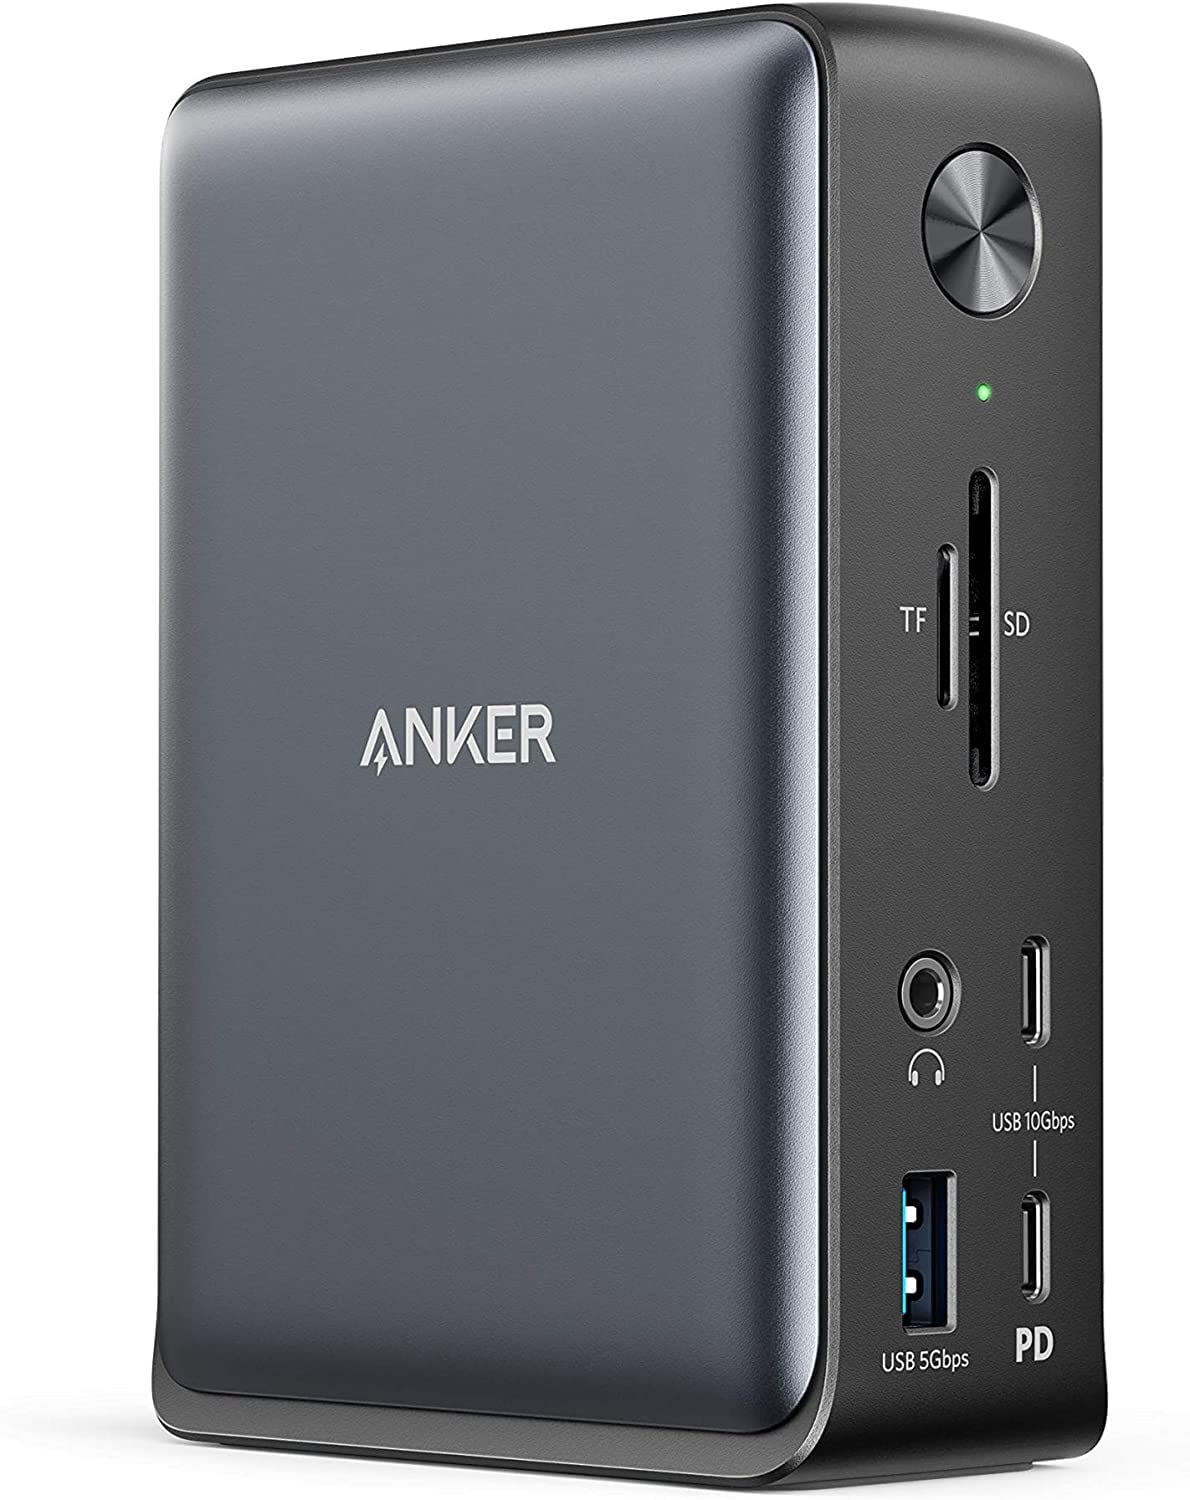 Anker  in USB C Docking Station USB C to 4K HDMI, Ethernet, Audio,  USB A Gen 1, USB C Gen 2, SD 3.0 ,W & W Charging for Laptop/Phone